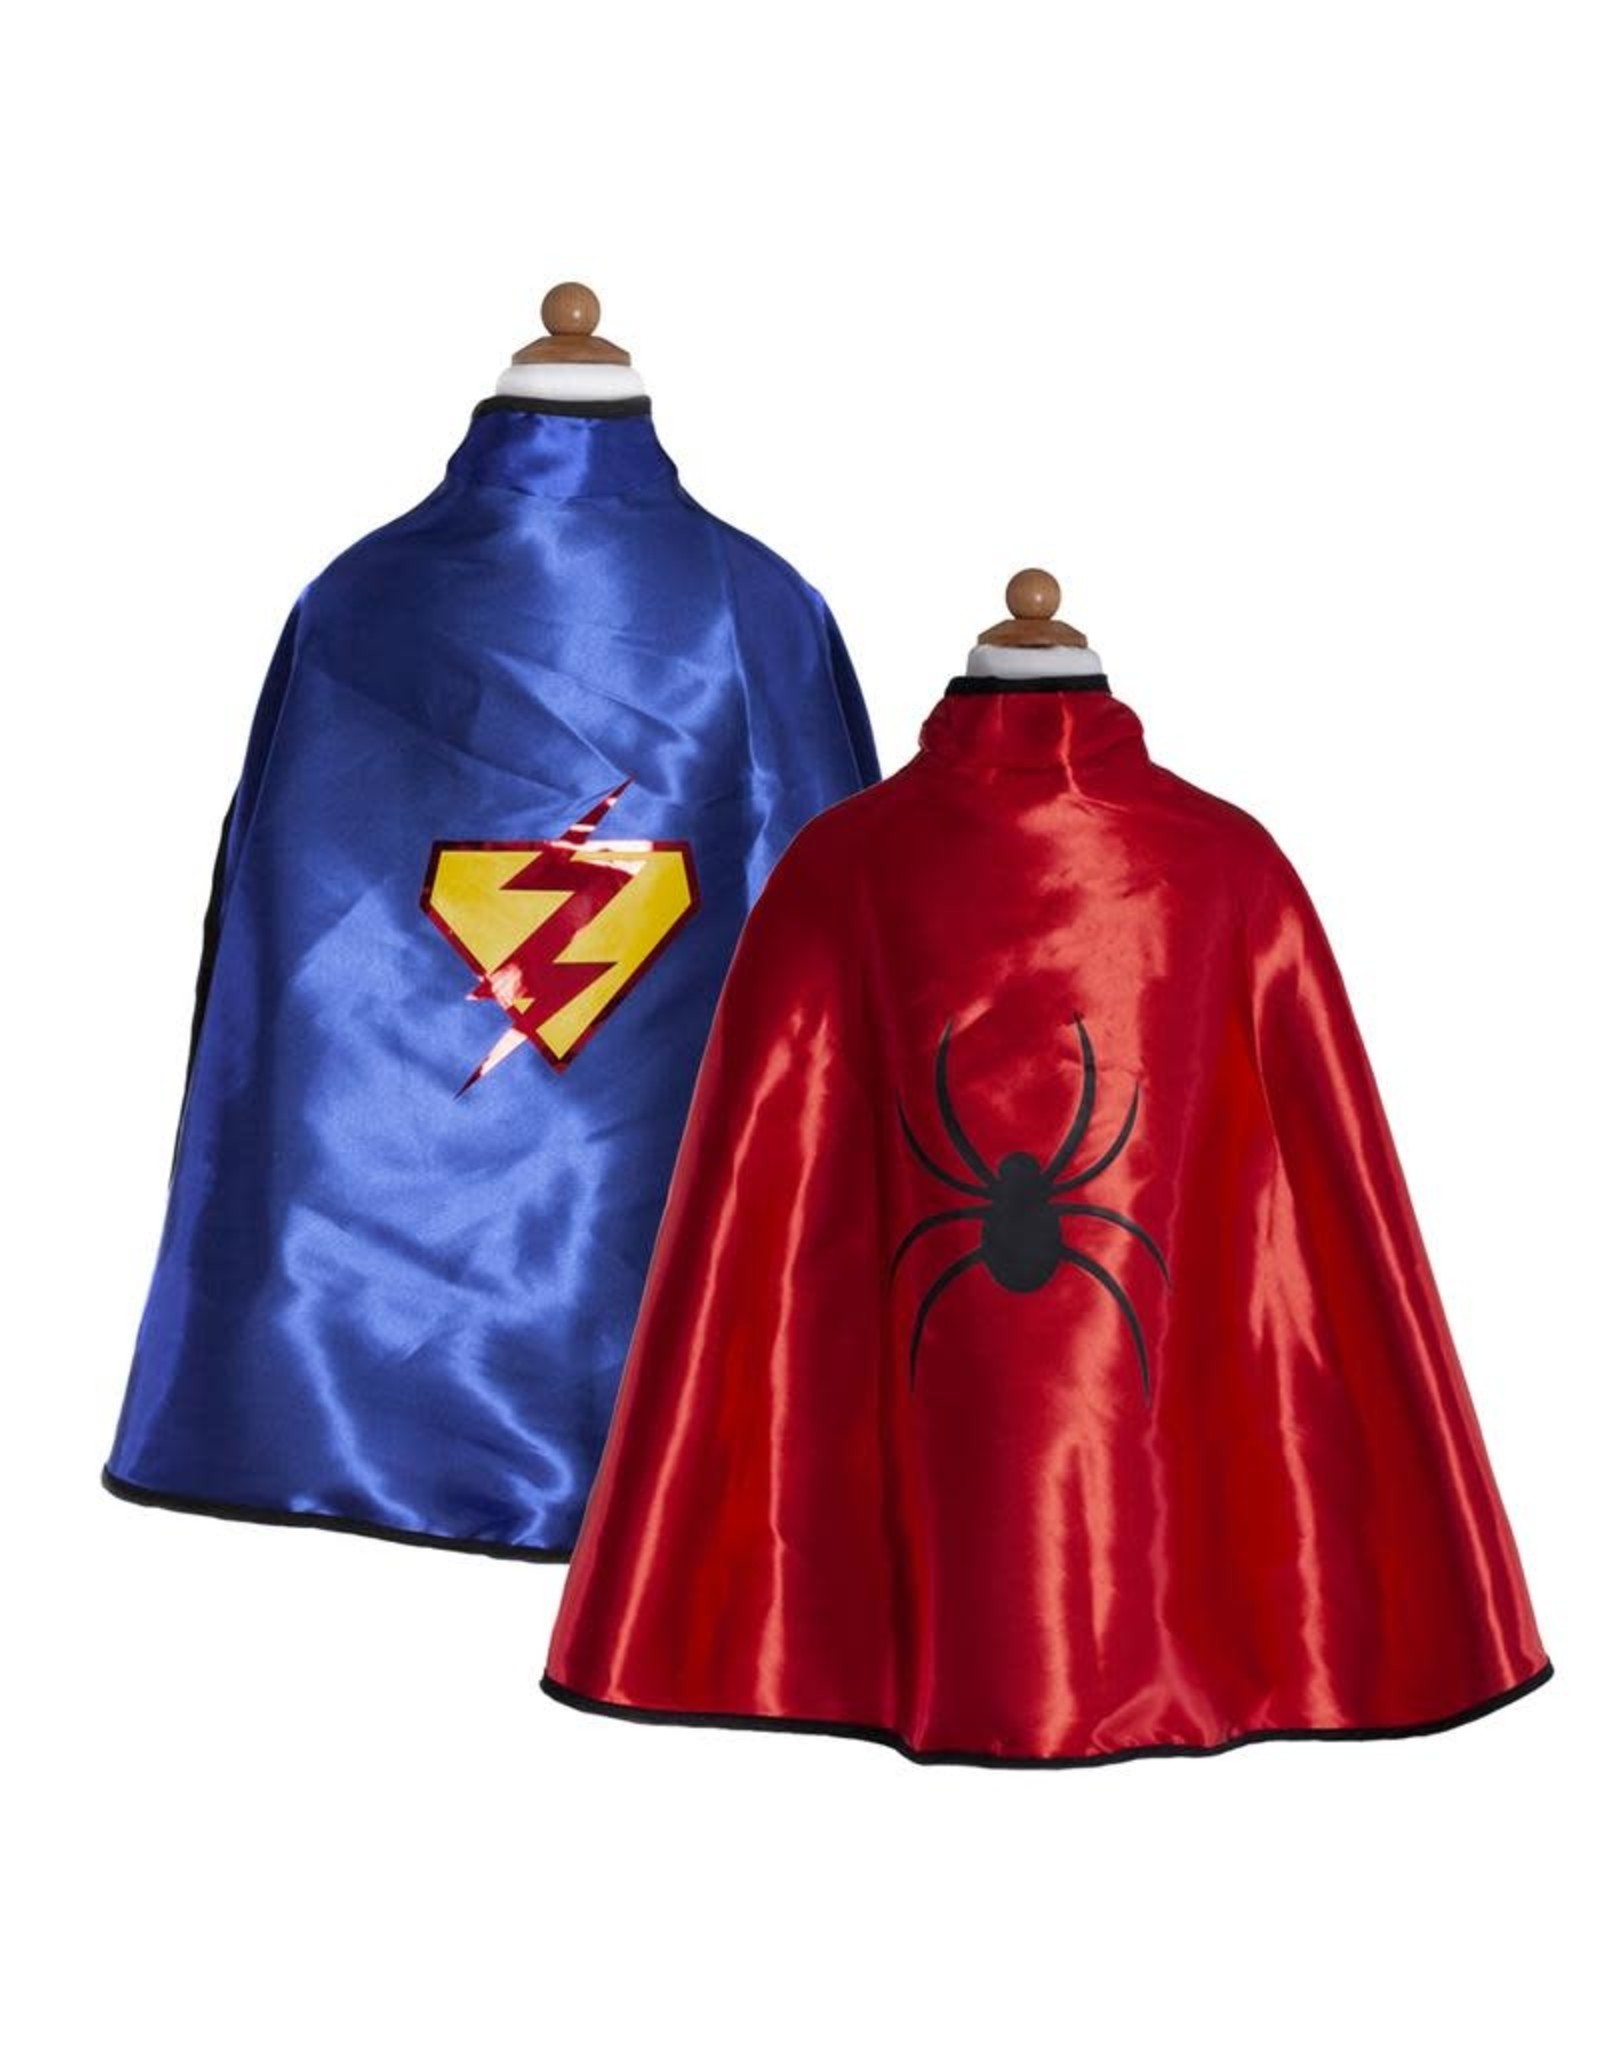 Great Pretenders Reversible Adventure Cape with Mask, Size 5/6